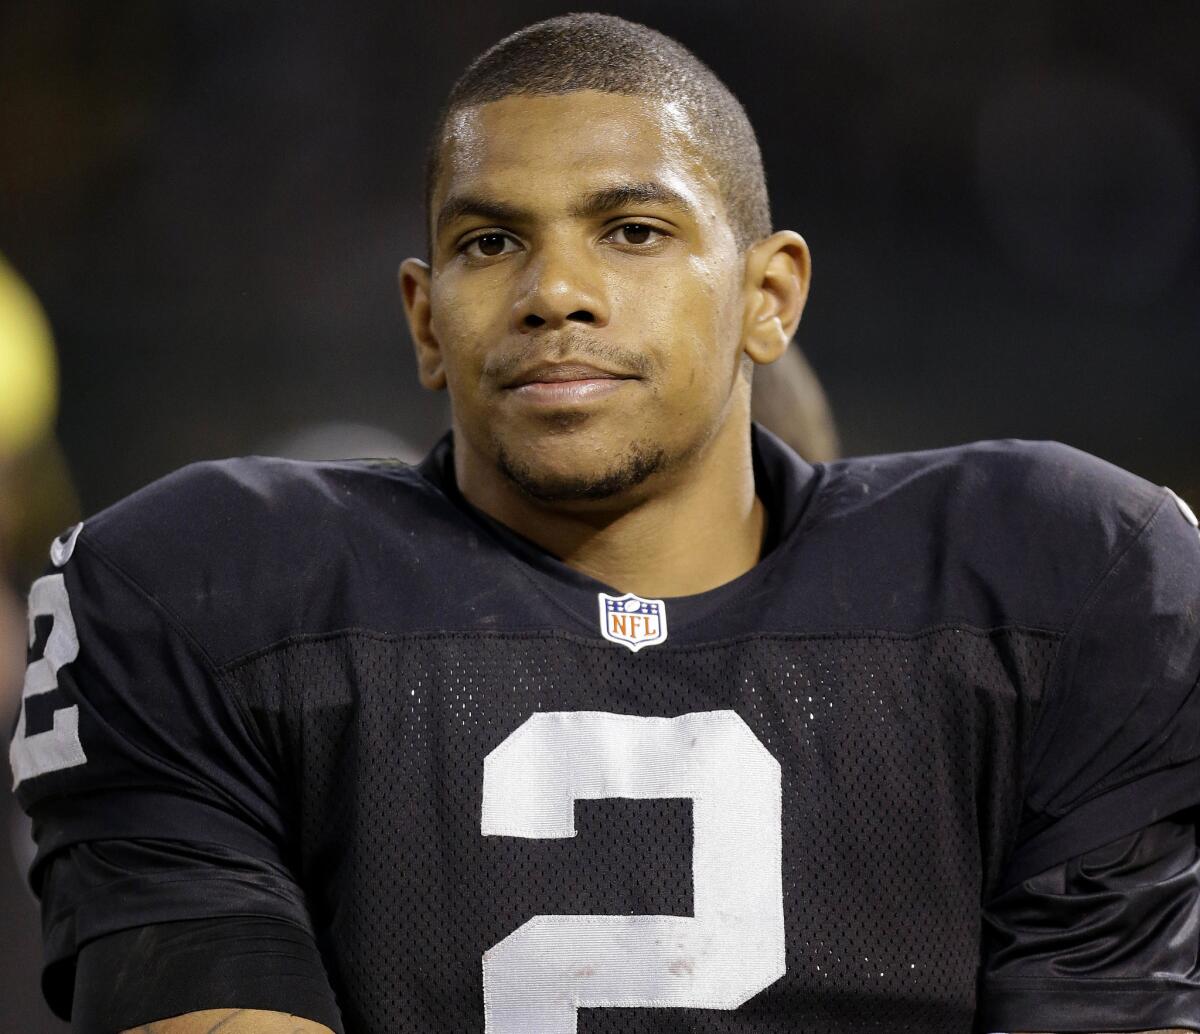 The Oakland Raiders traded backup quarterback Terrelle Pryor to the Seattle Seahawks on Monday.